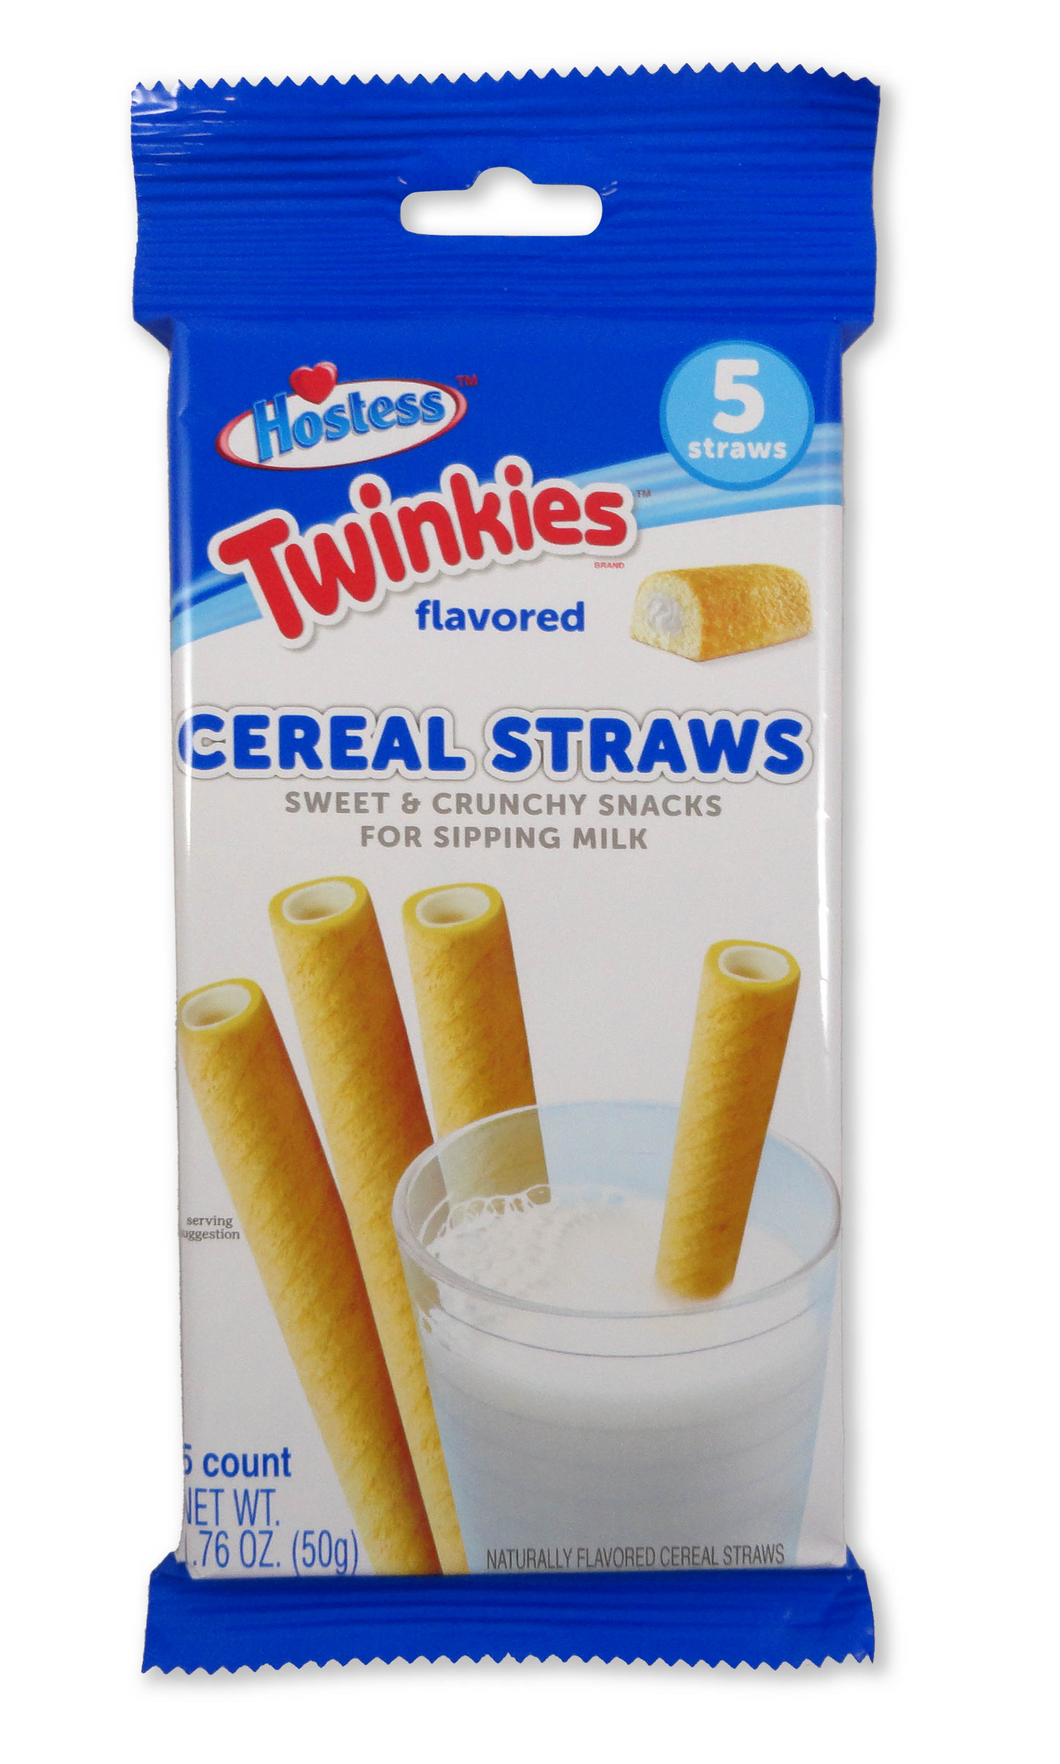 TWINKIES Cereal Straw - 5 pack